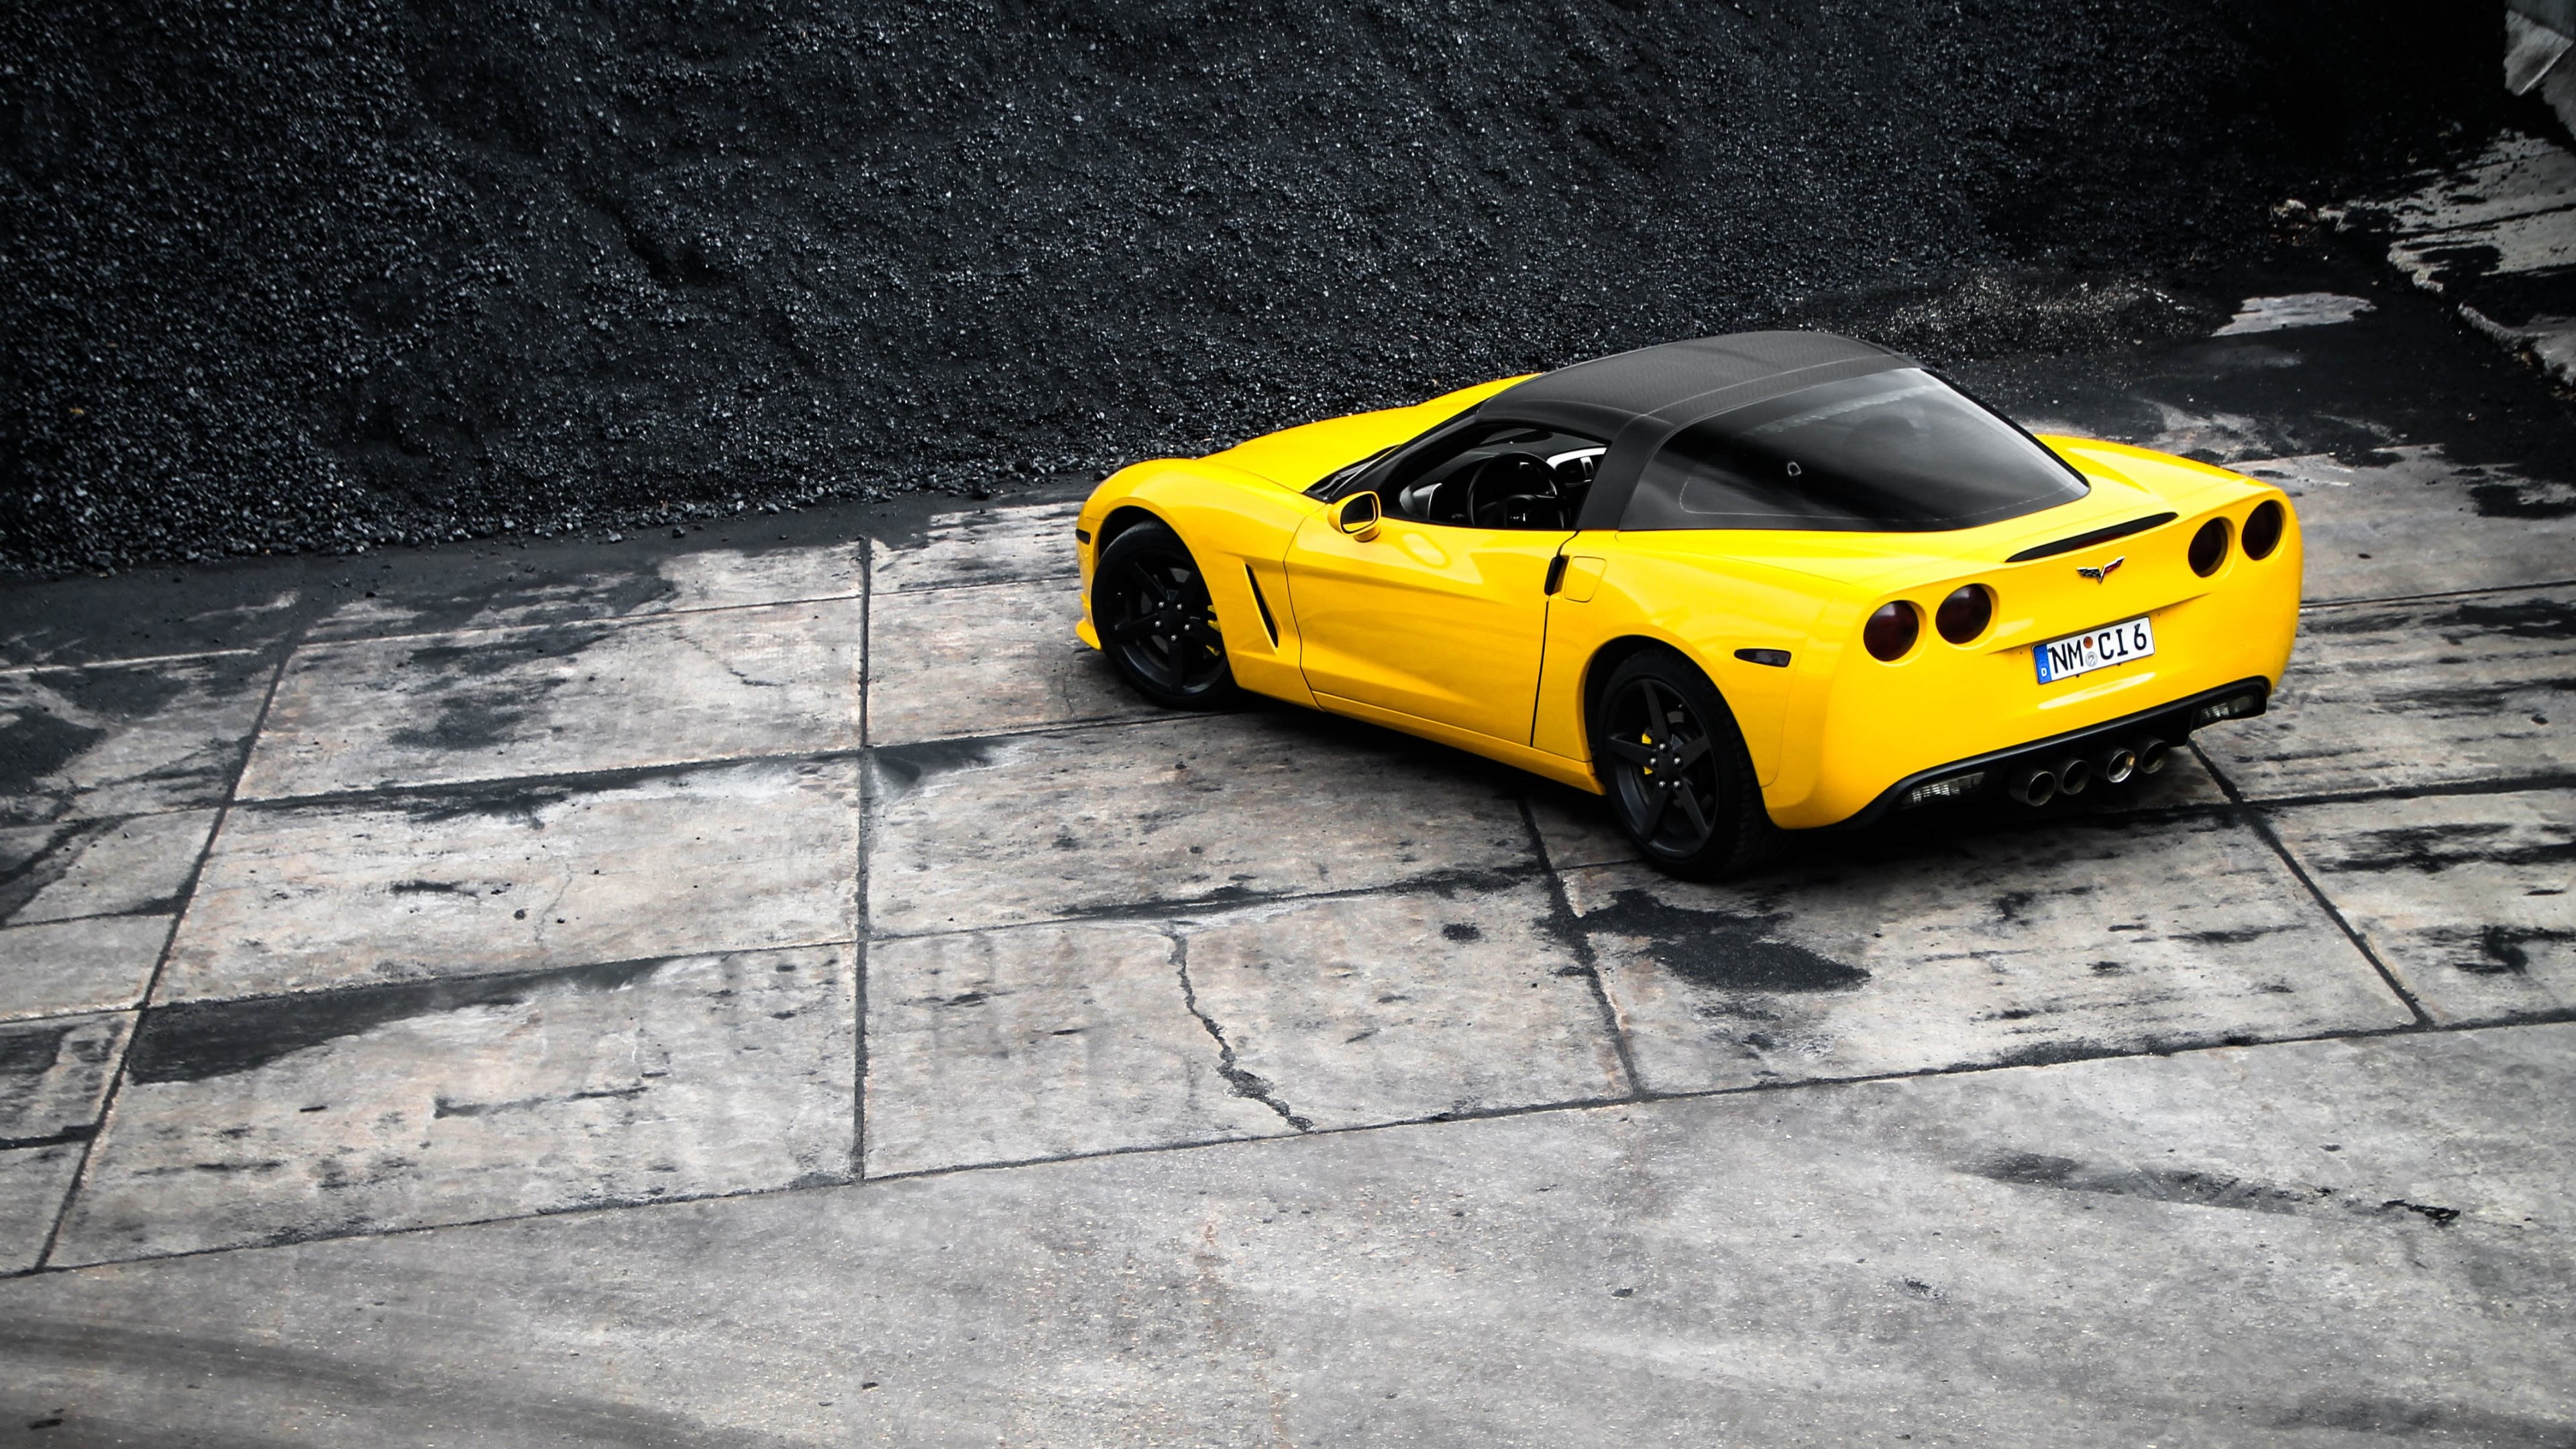 Corvette: C6 ZR1 Chevy sports car, A classic yellow model, Supercharged engine. 3840x2160 4K Background.